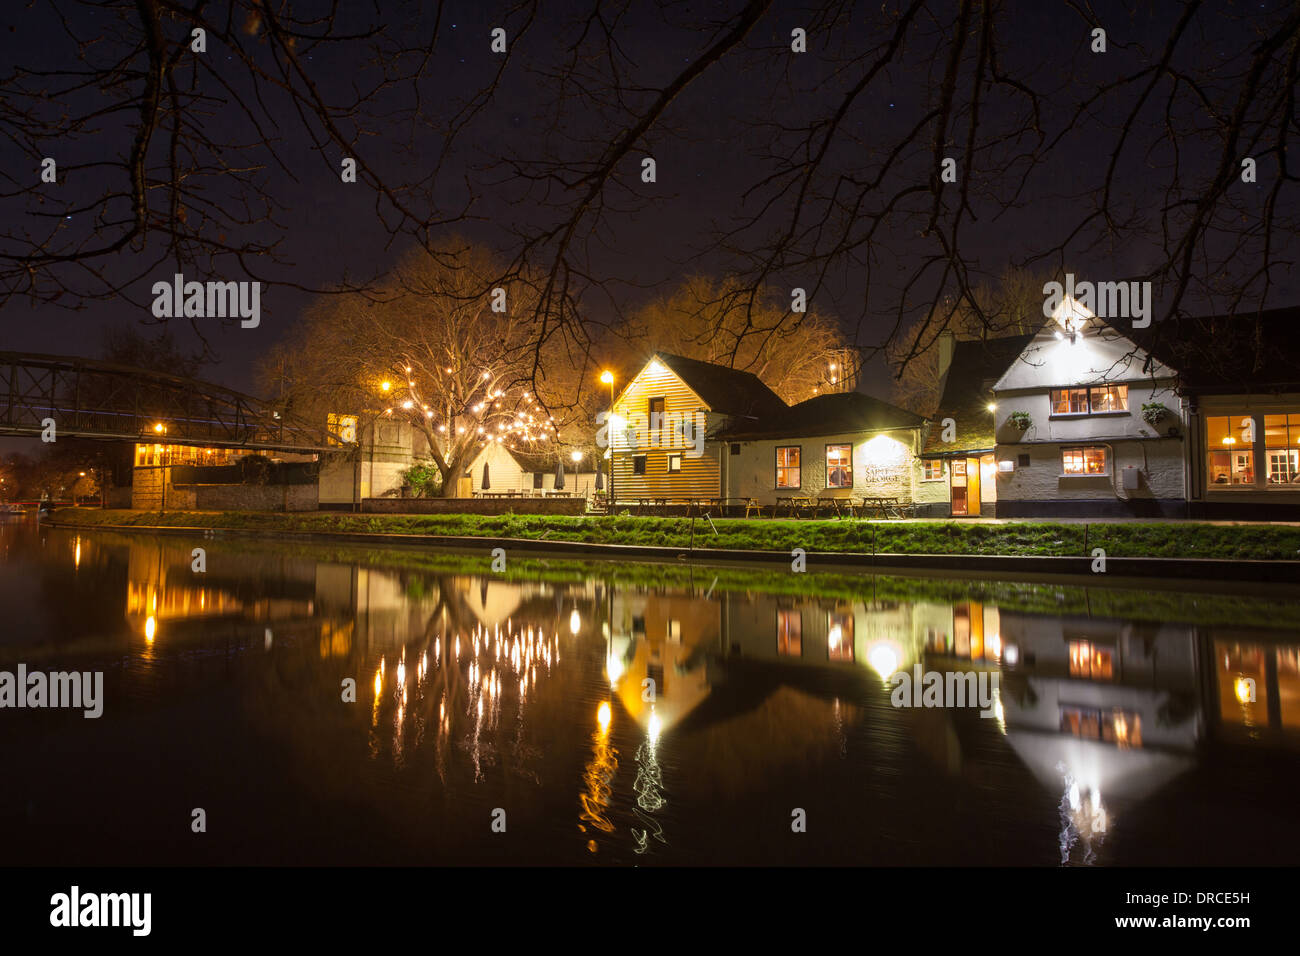 Fort St George Pub on the River Cam, Cambridge at night. Stock Photo